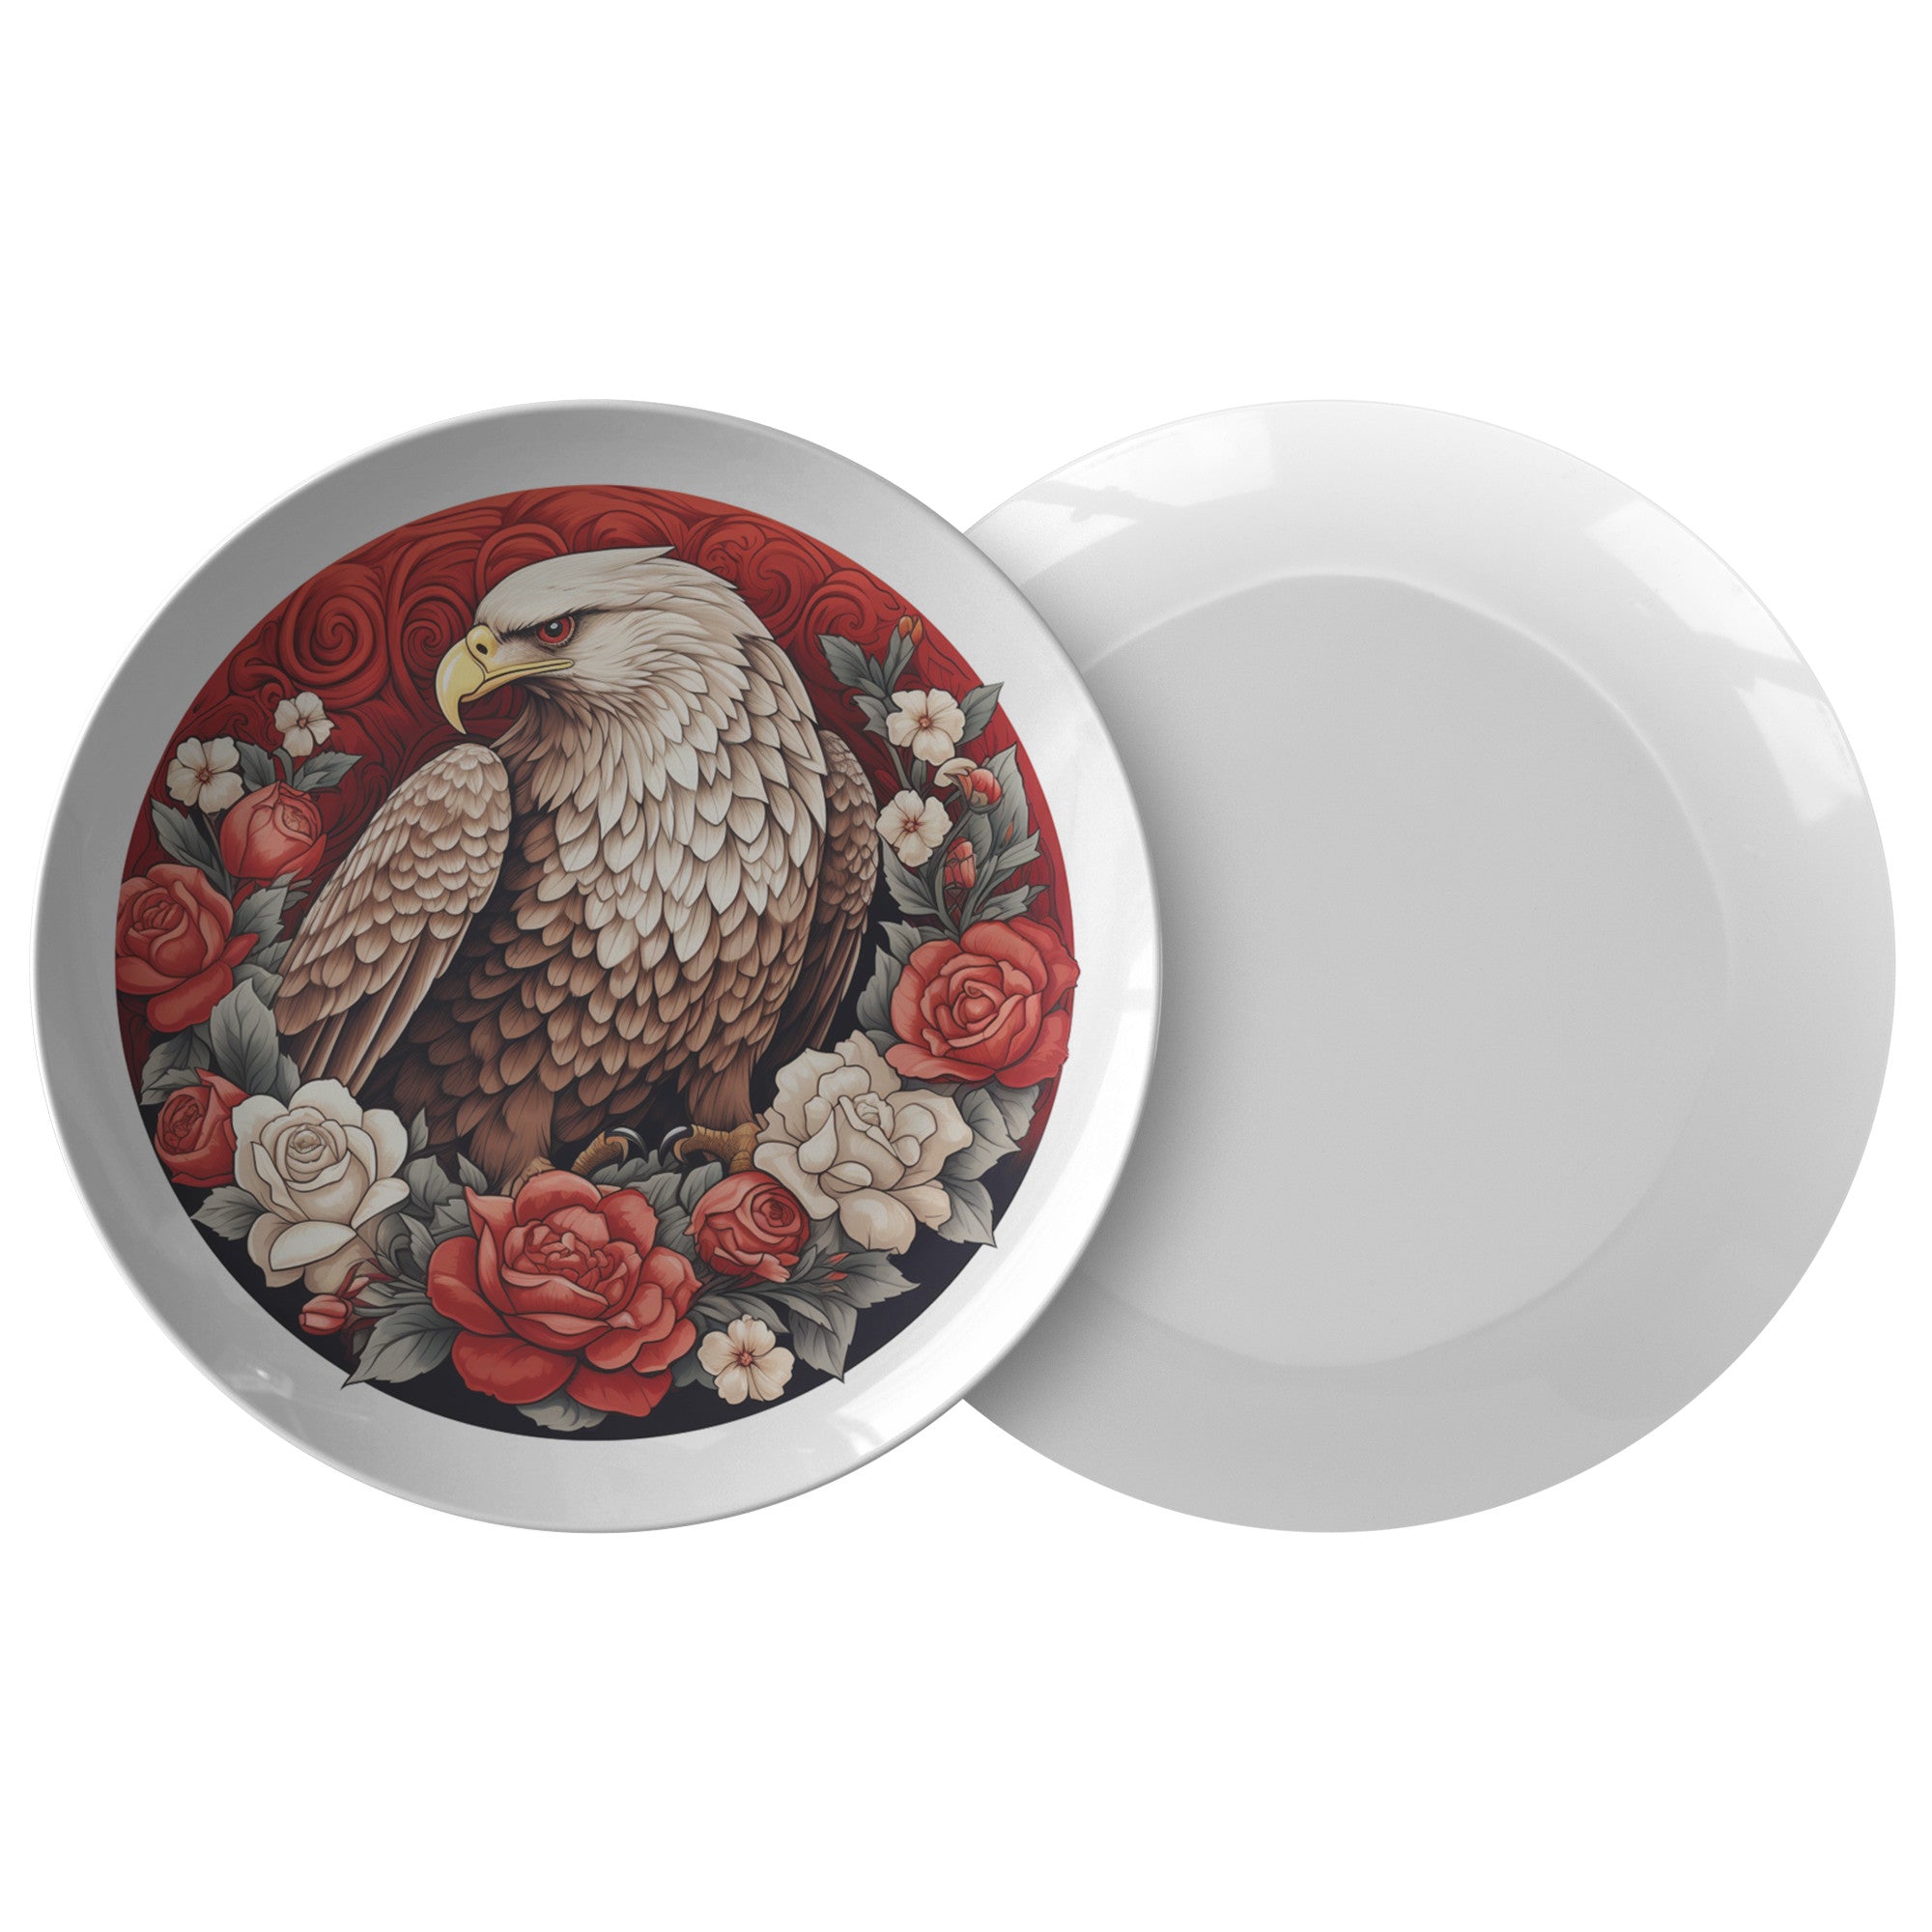 Eagle With Red & White Roses Plate Kitchenware teelaunch Single  